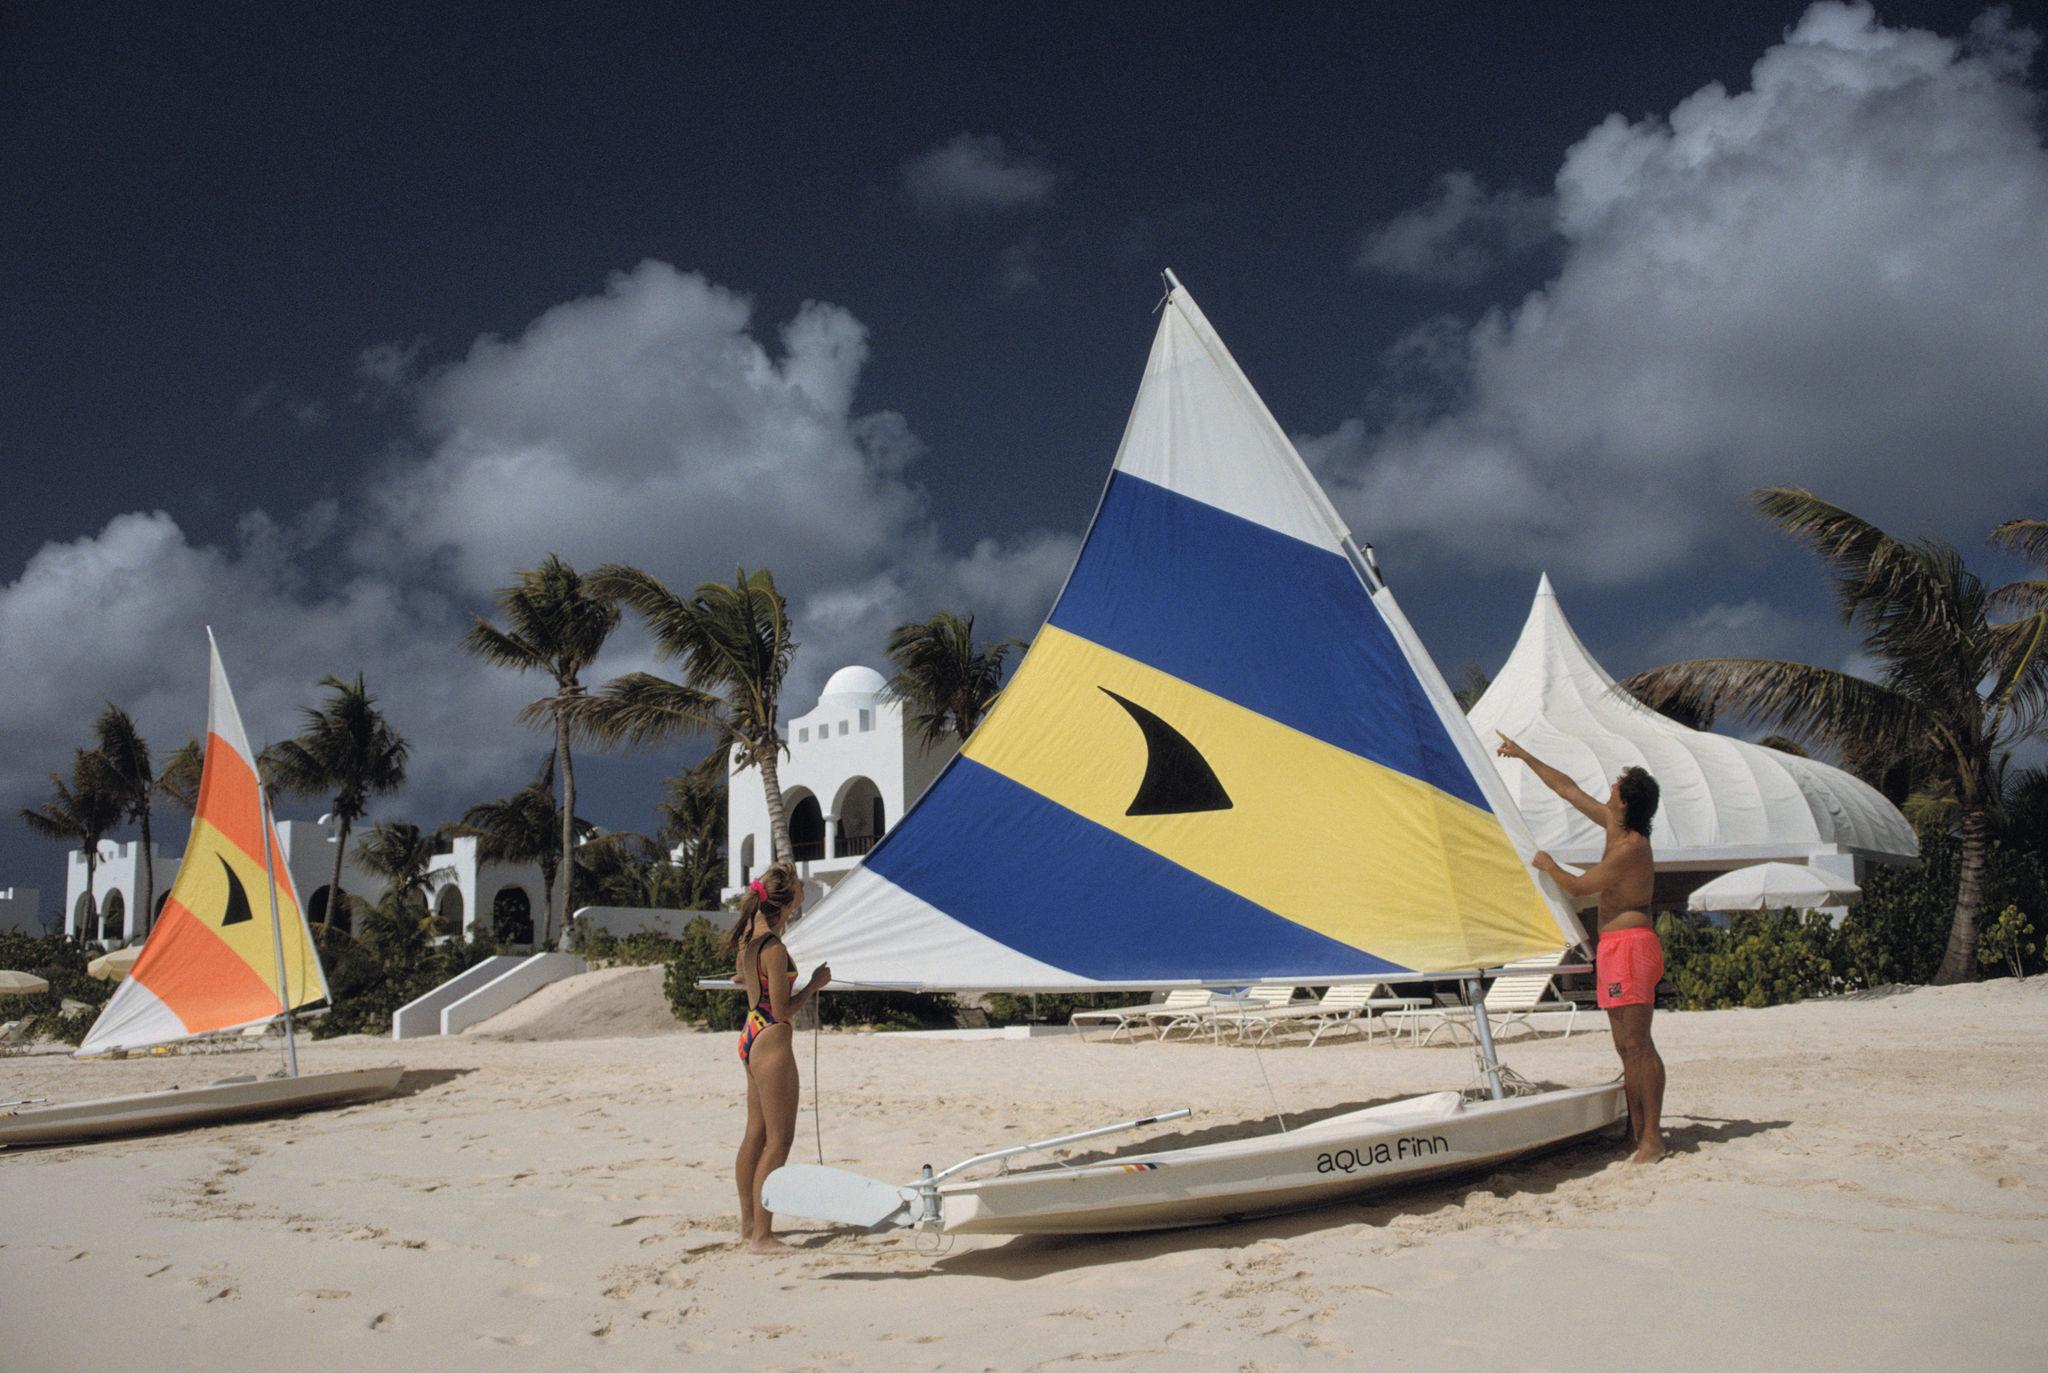 'Sailing In Anguilla' 1992 Slim Aarons Limited Estate Edition Print 
A couple adjusting the sail on their dinghy at a luxury resort on the island of Anguilla in the West Indies, January 1992. 

Slim Aarons Chromogenic C print 
Printed Later 
Slim